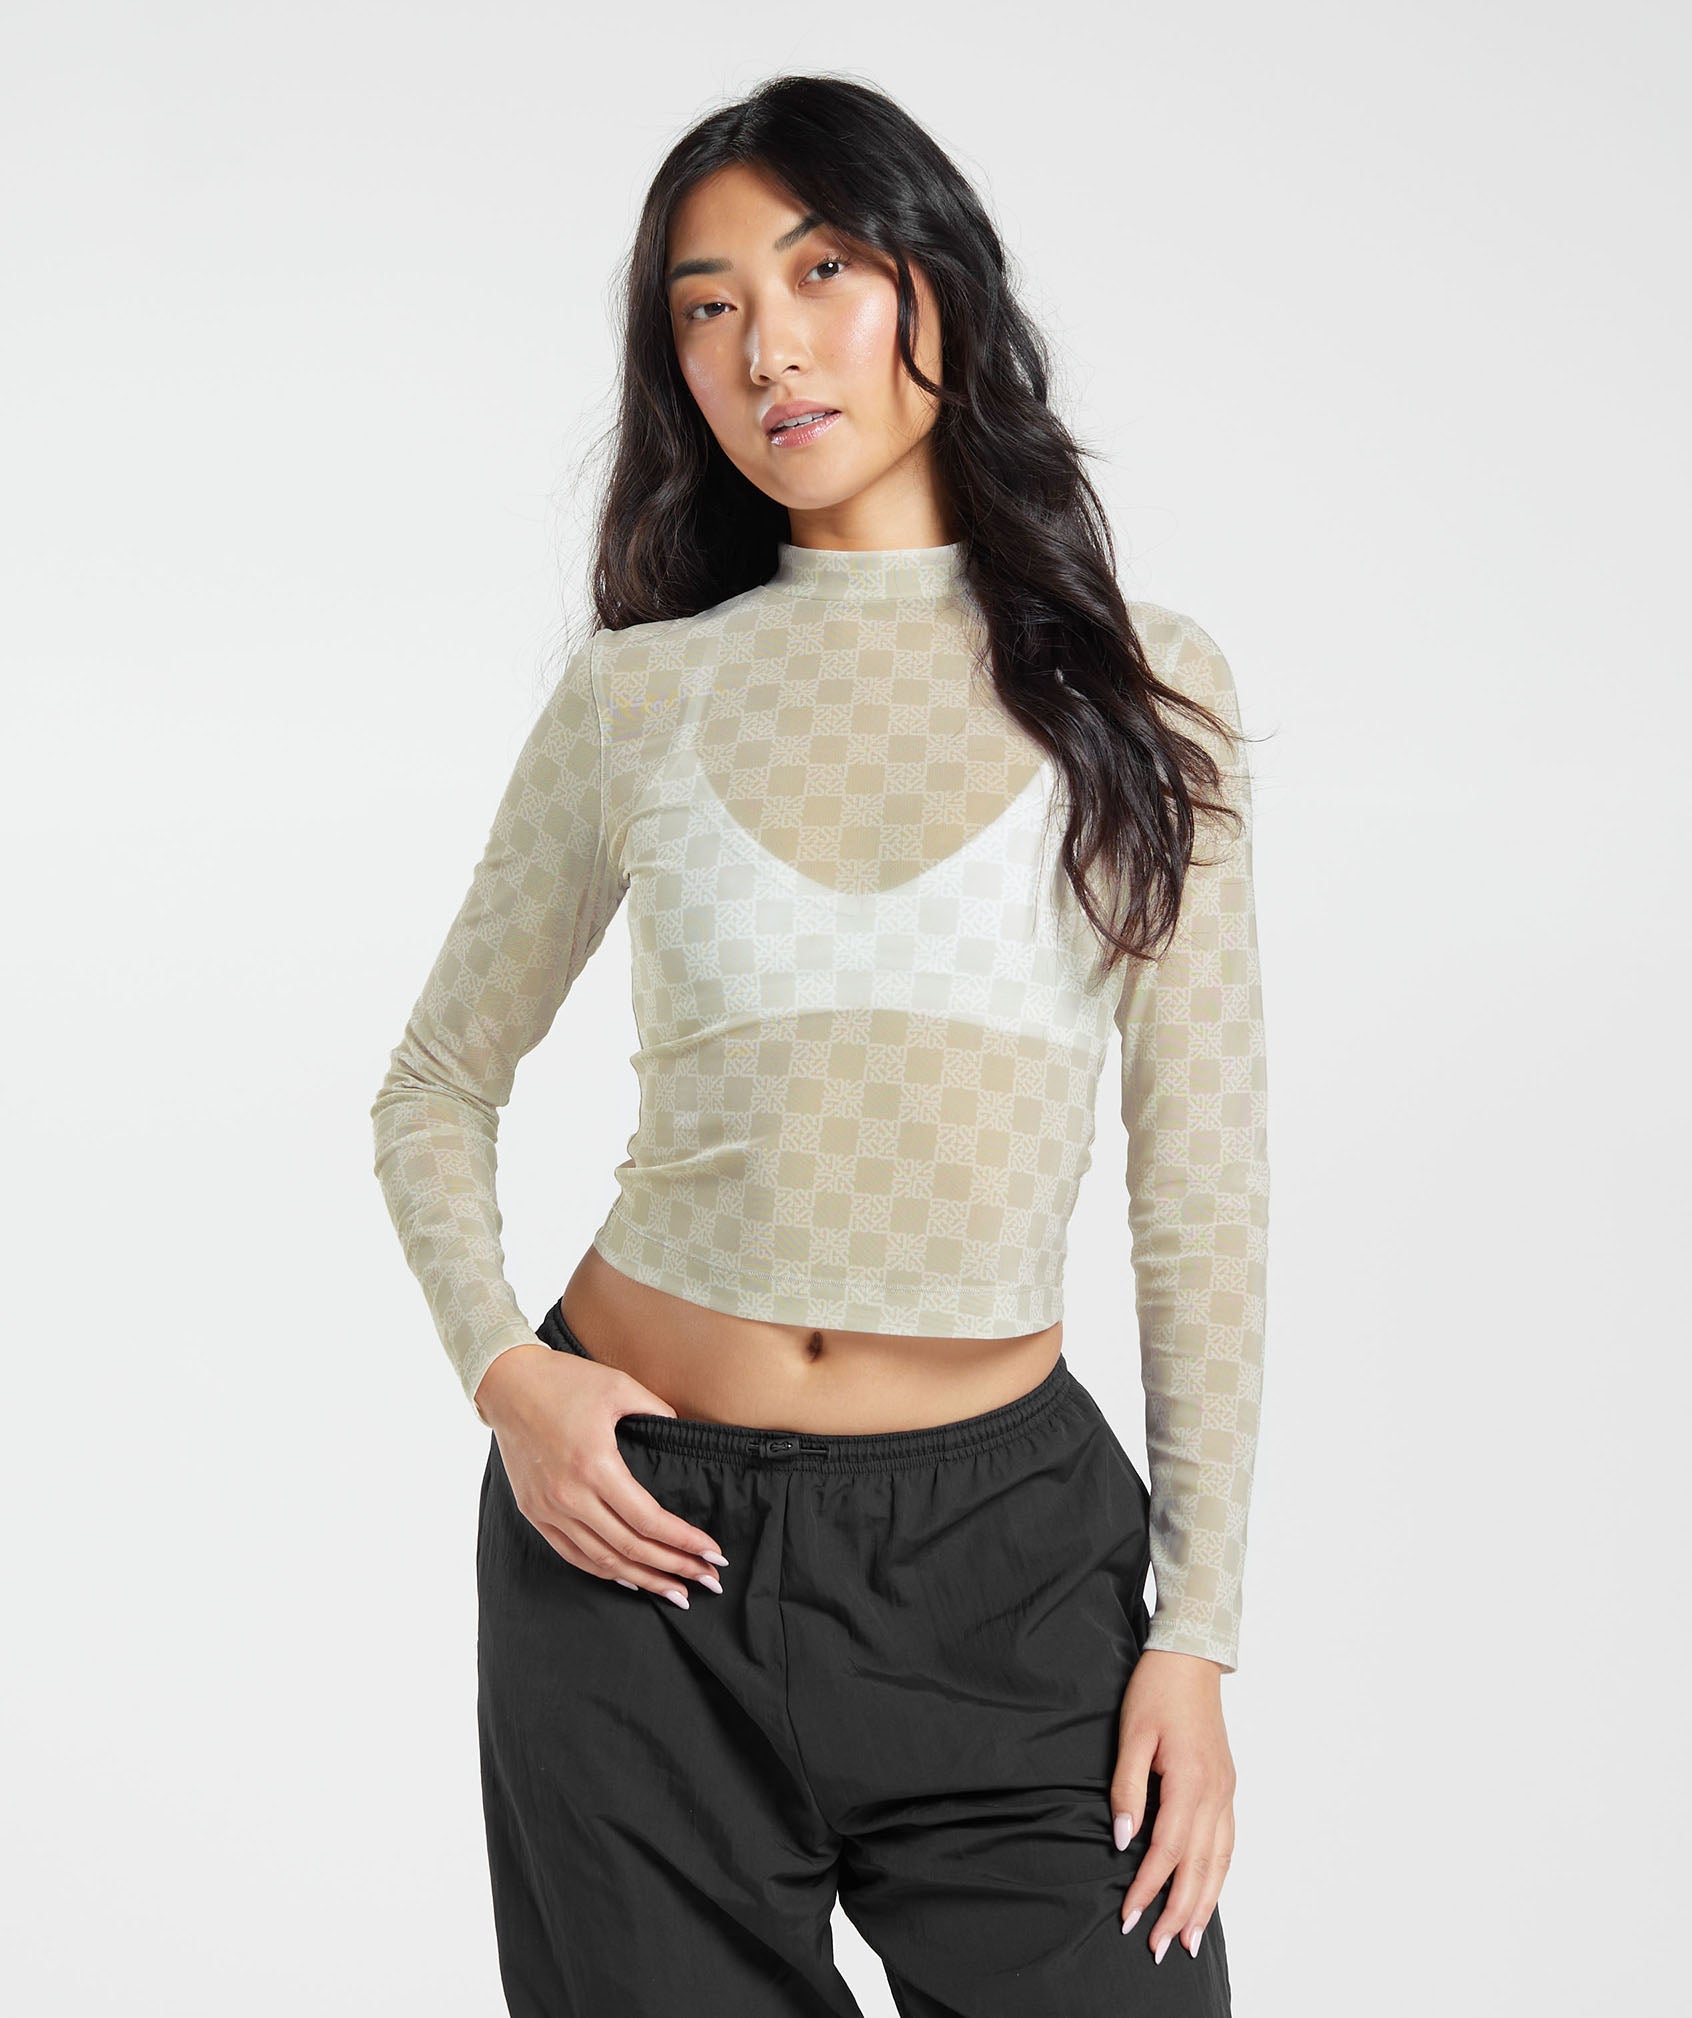 Monogram Mesh Long Sleeve Top in {{variantColor} is out of stock